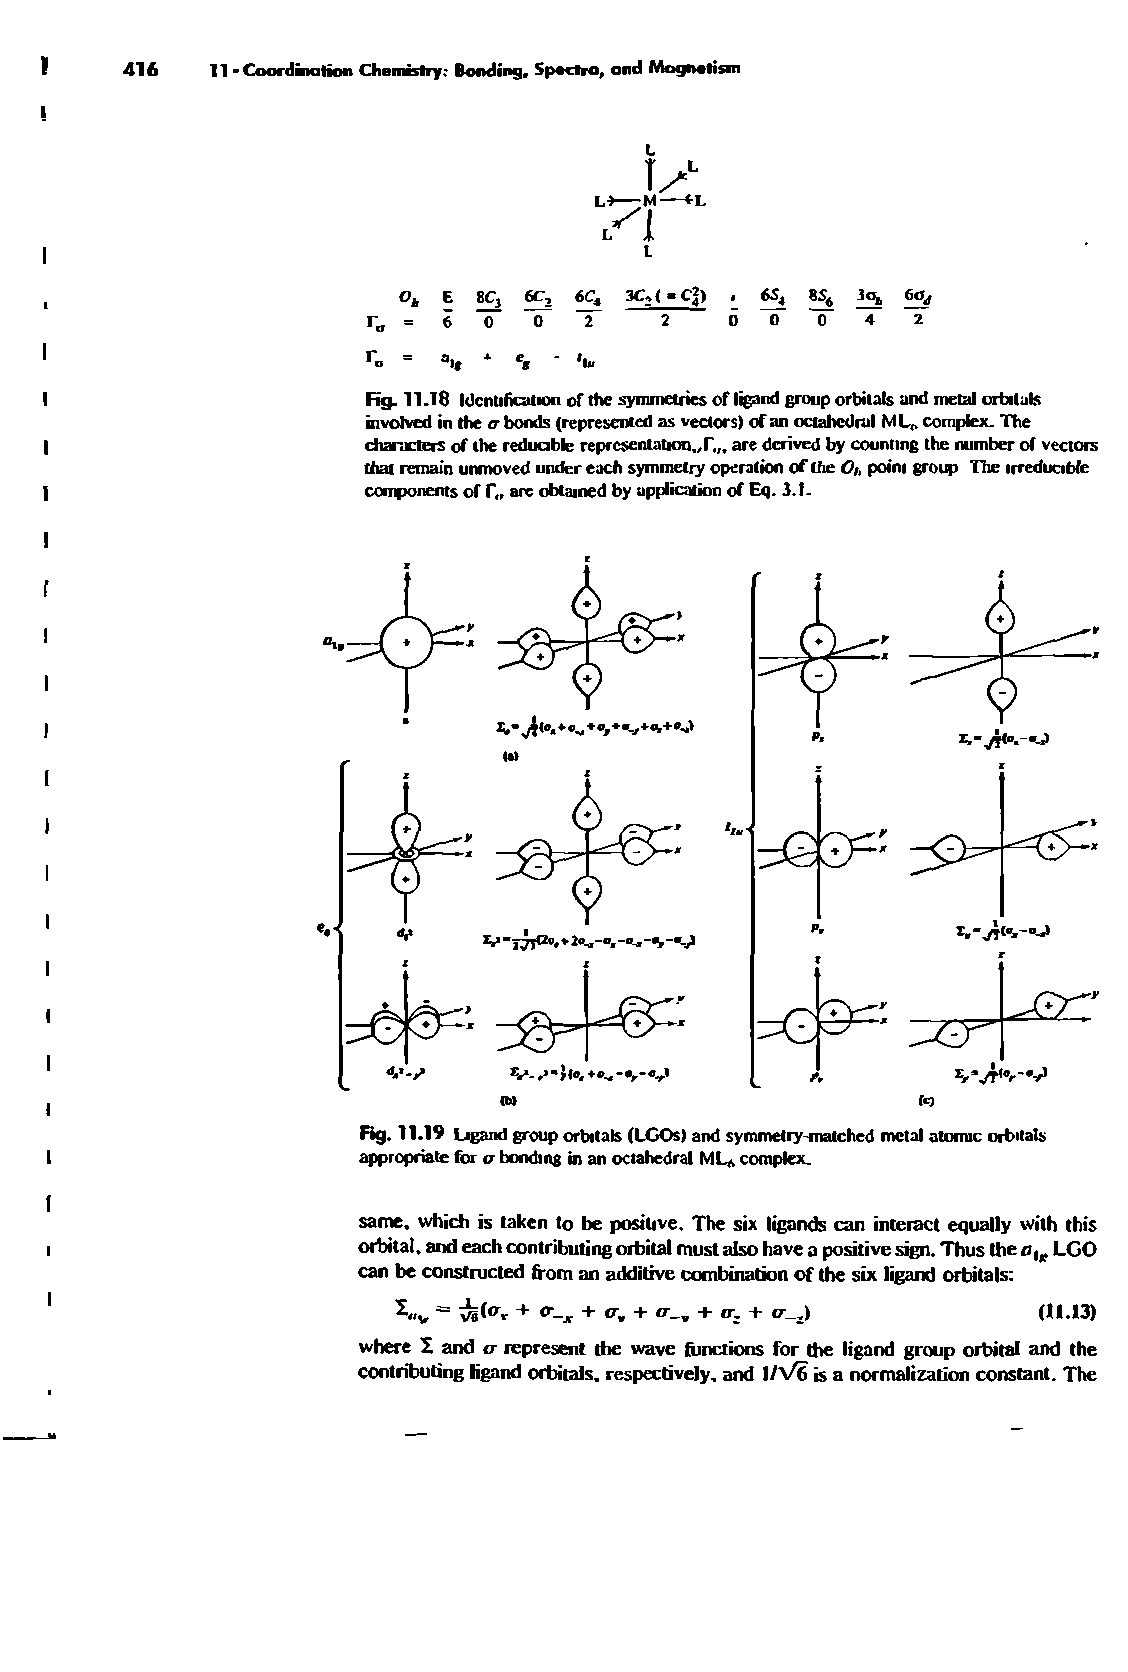 Fig. 11.19 Ligand group orbitals (LGOs) and symmetry-matched metal atomic orbitals appropriate for a bonding in an octahedral ML complex.